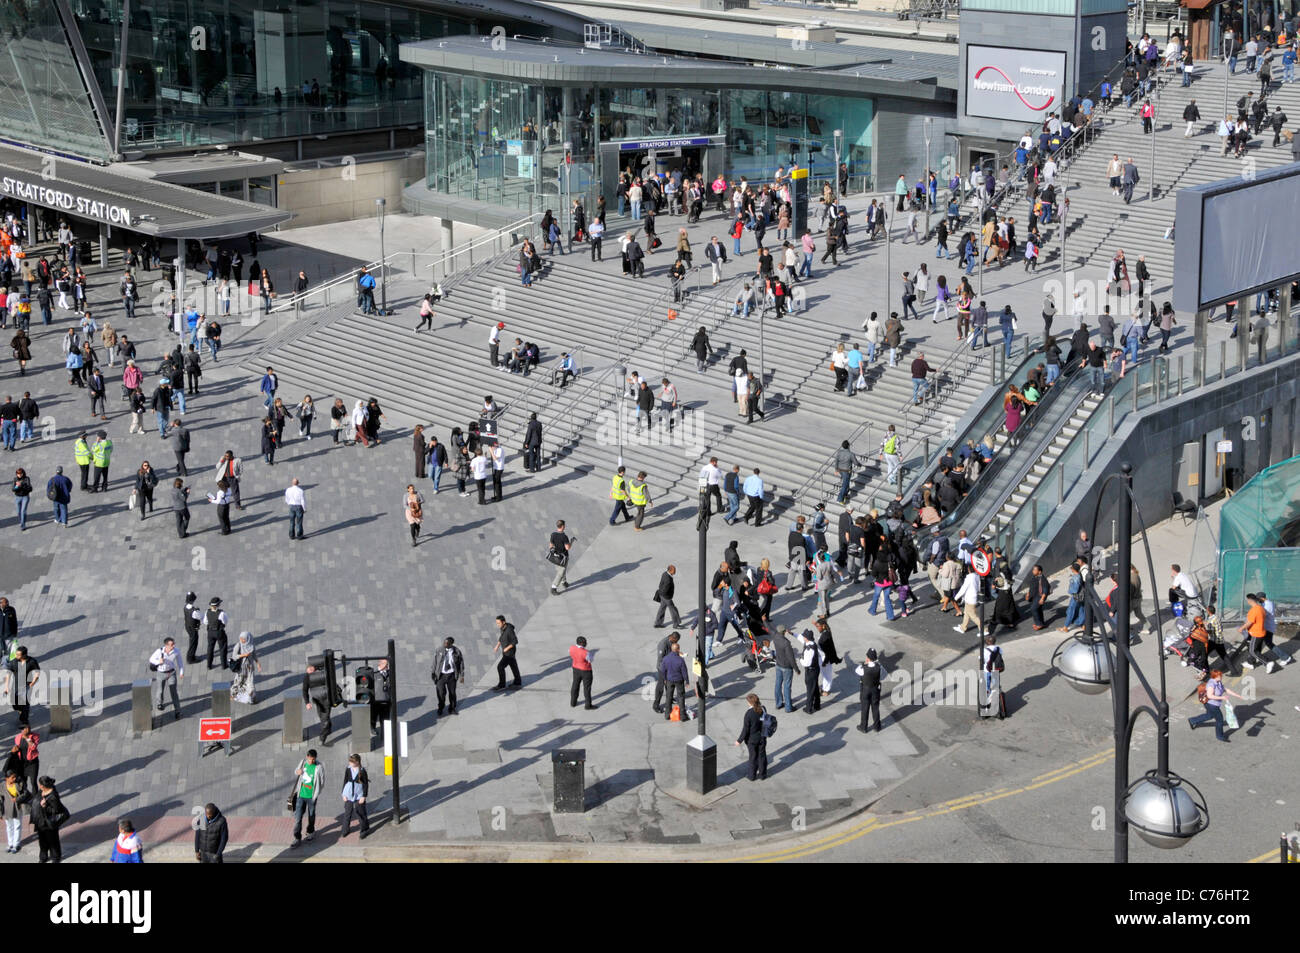 Aerial birds eye view people Stratford train station steps escalators to entrance at Westfield Shopping Centre Stratford Newham East London England UK Stock Photo